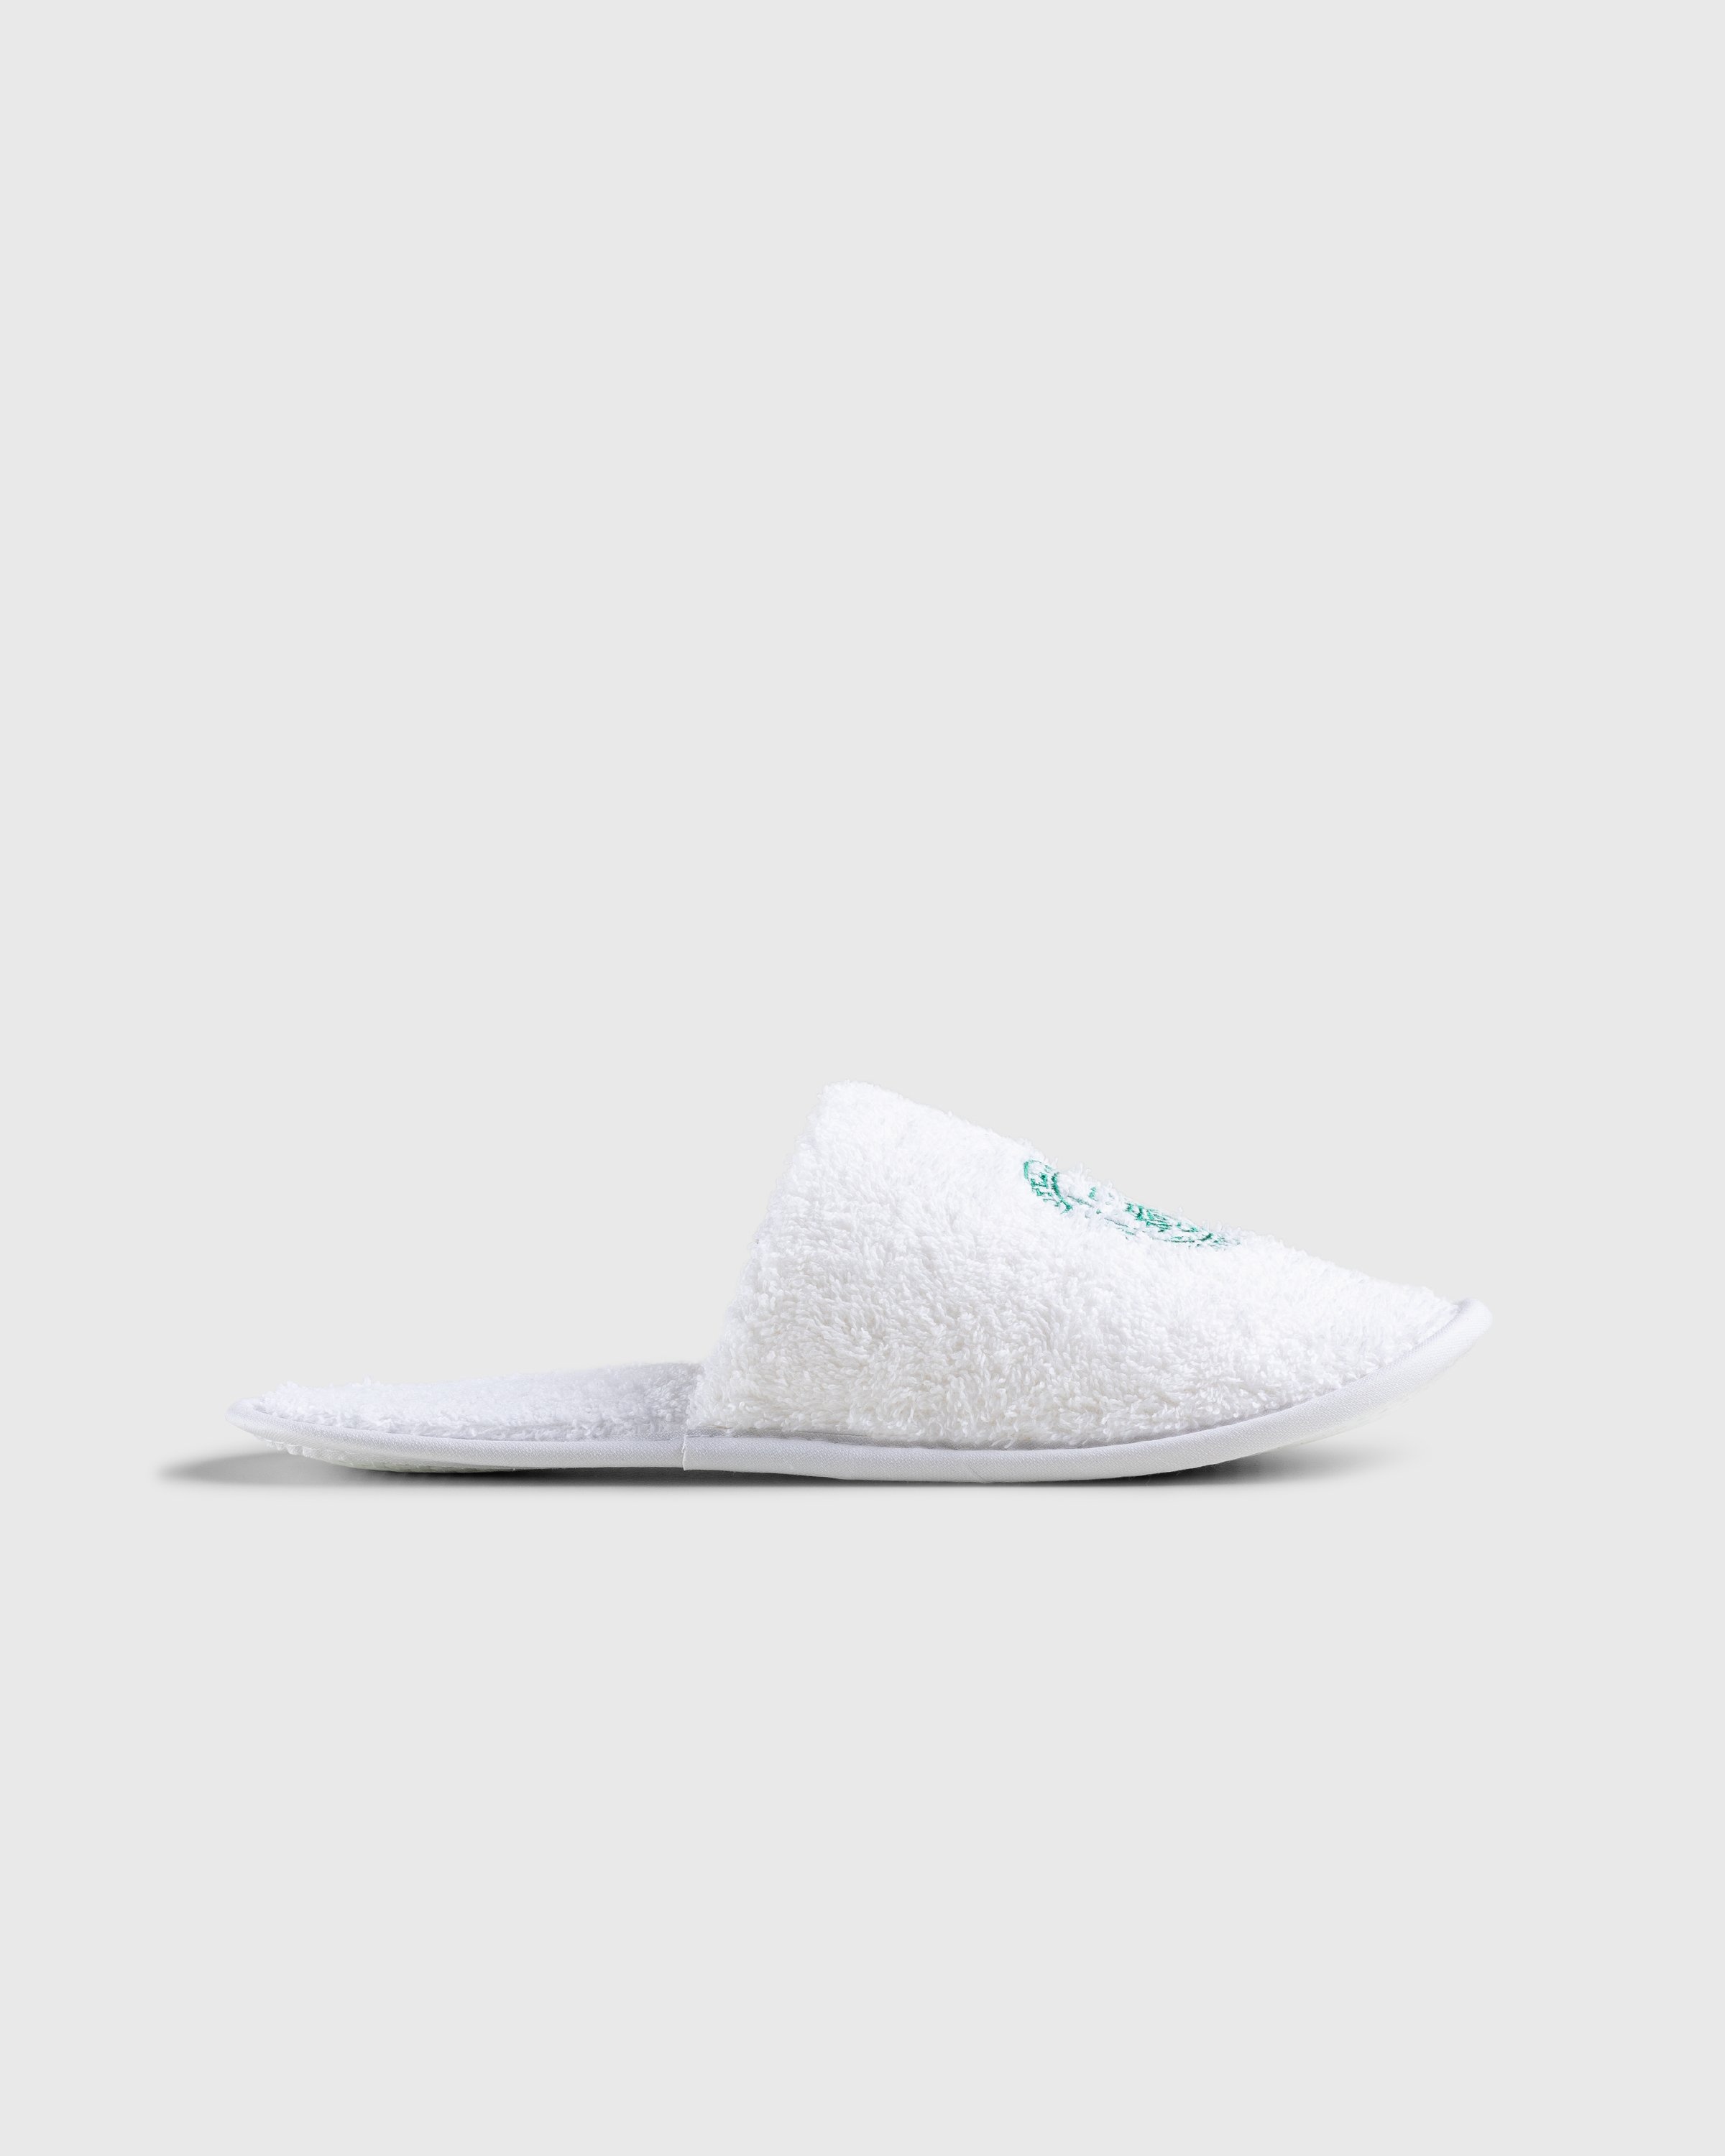 Hotel Amour x Highsnobiety – Not In Paris 4 Slippers White - Slippers - White - Image 2